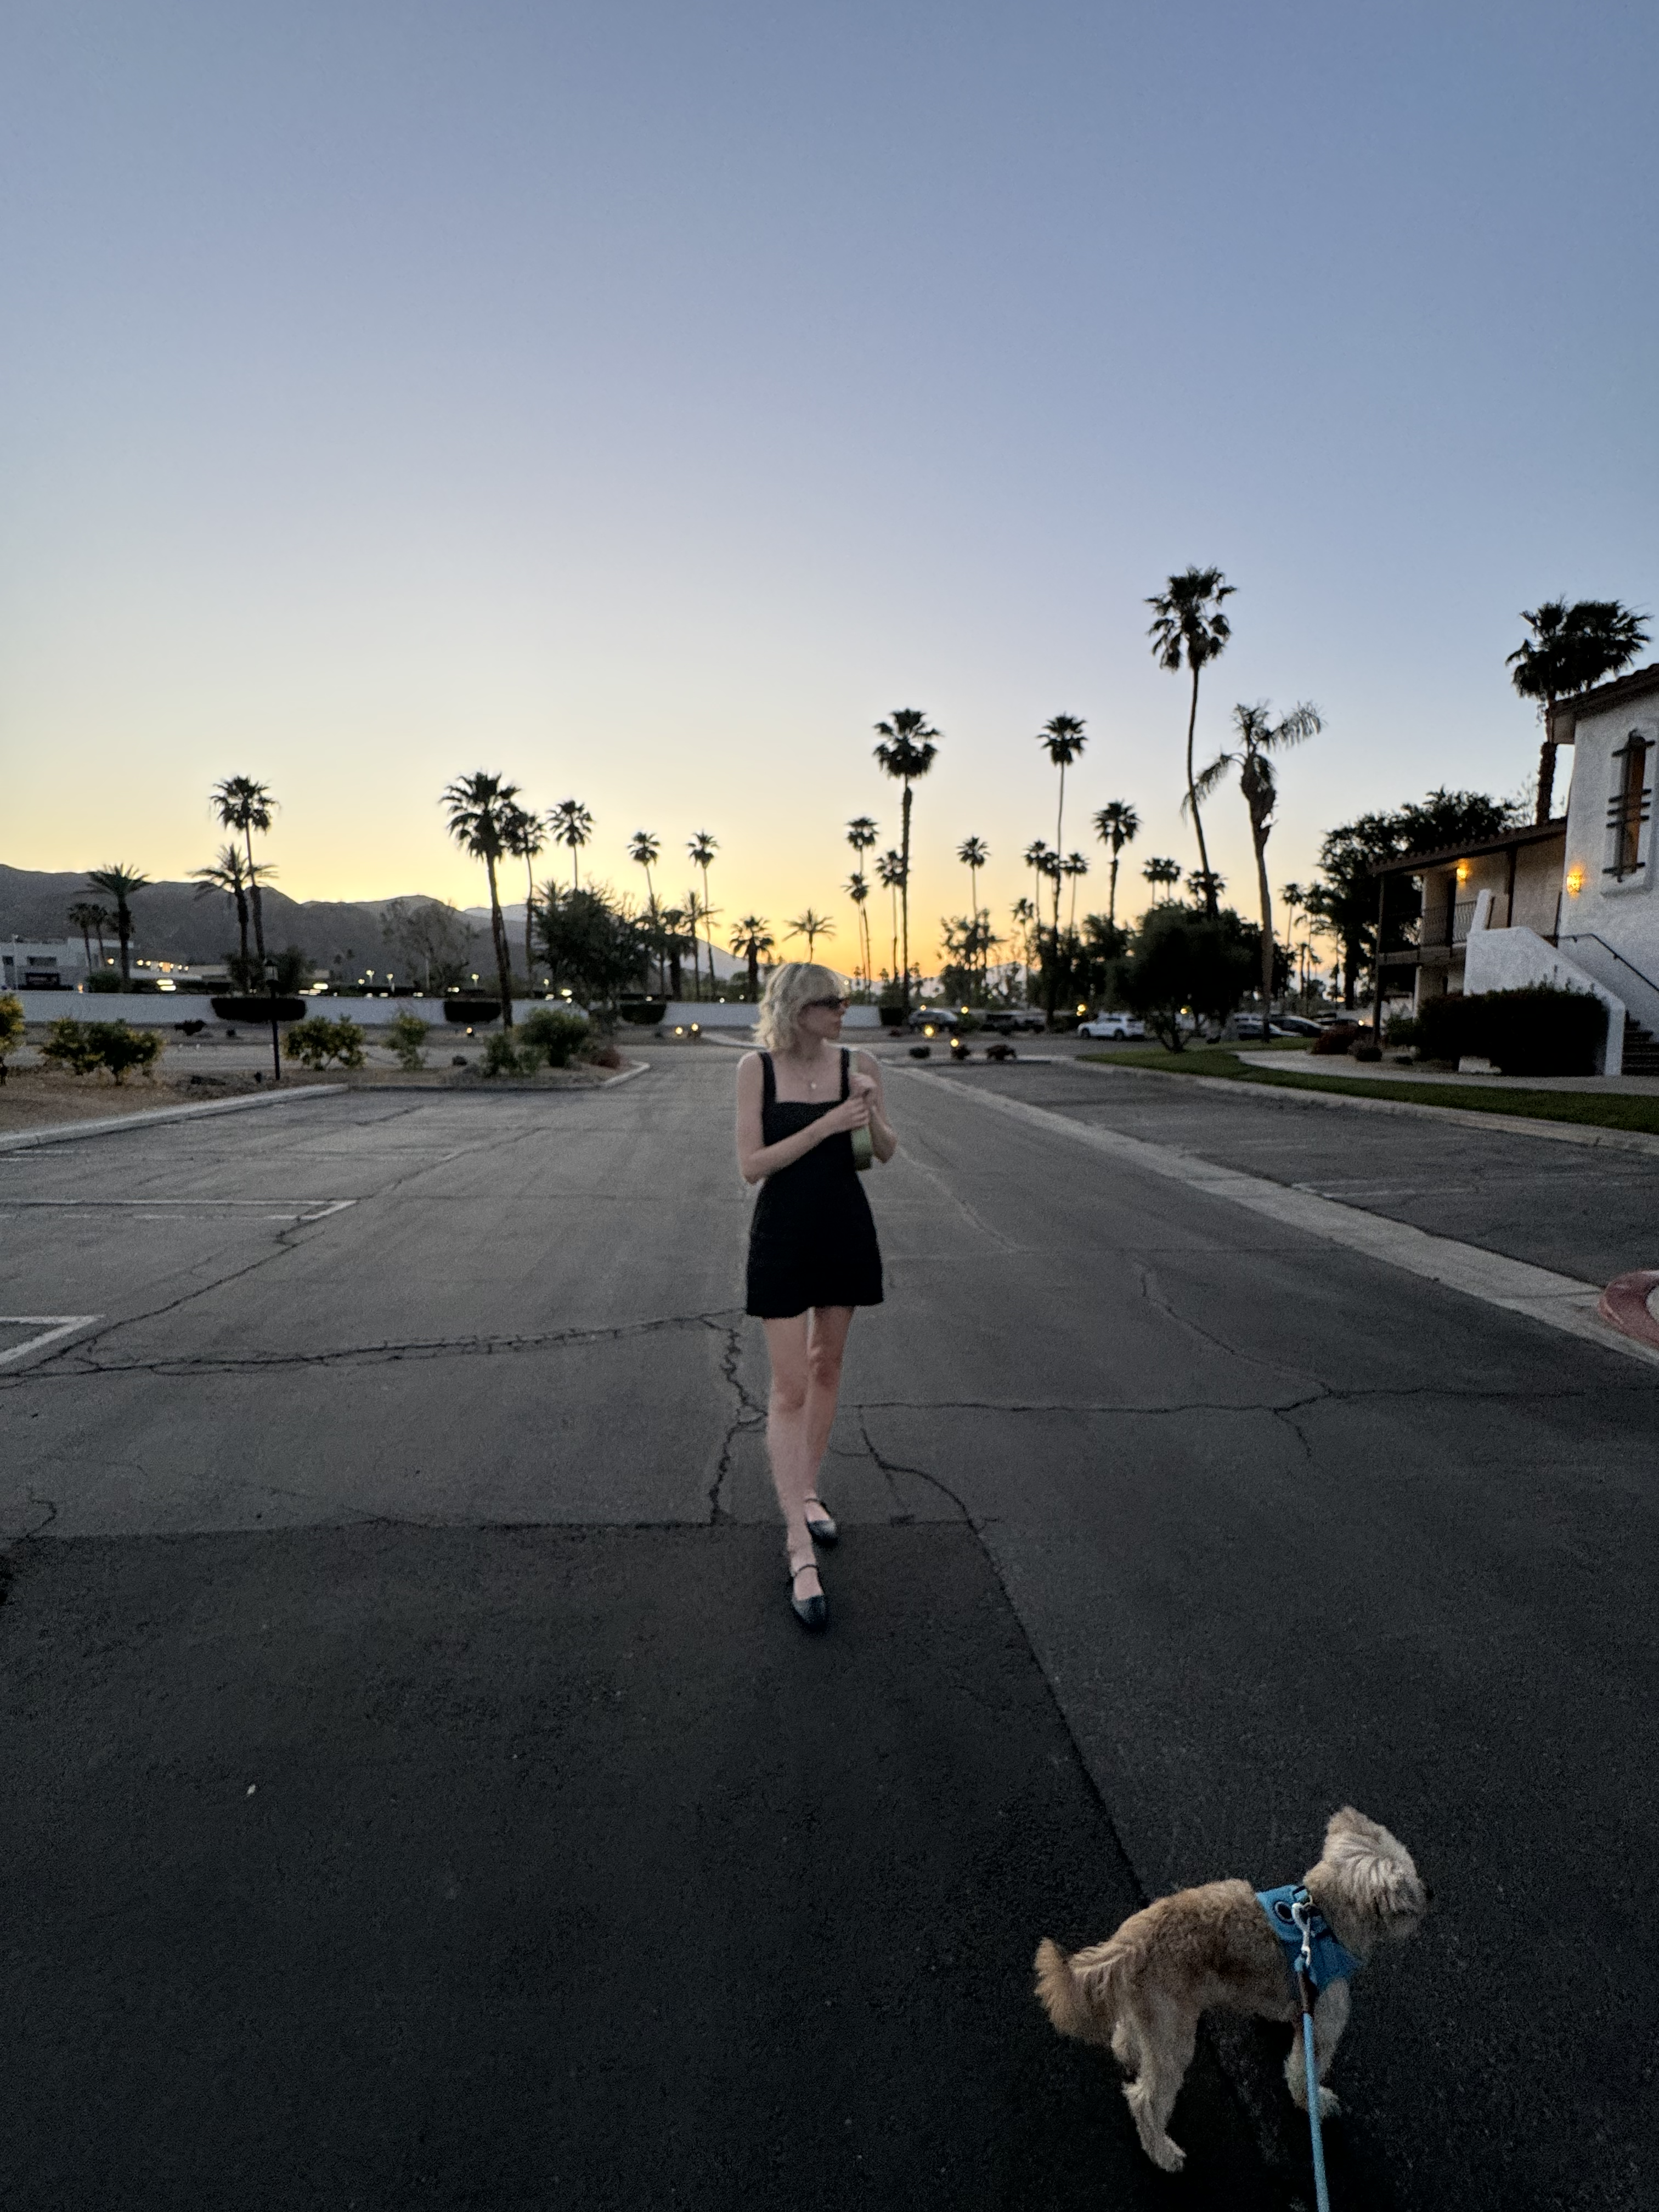 Woman walking a dog on a street lined with palm trees at dusk